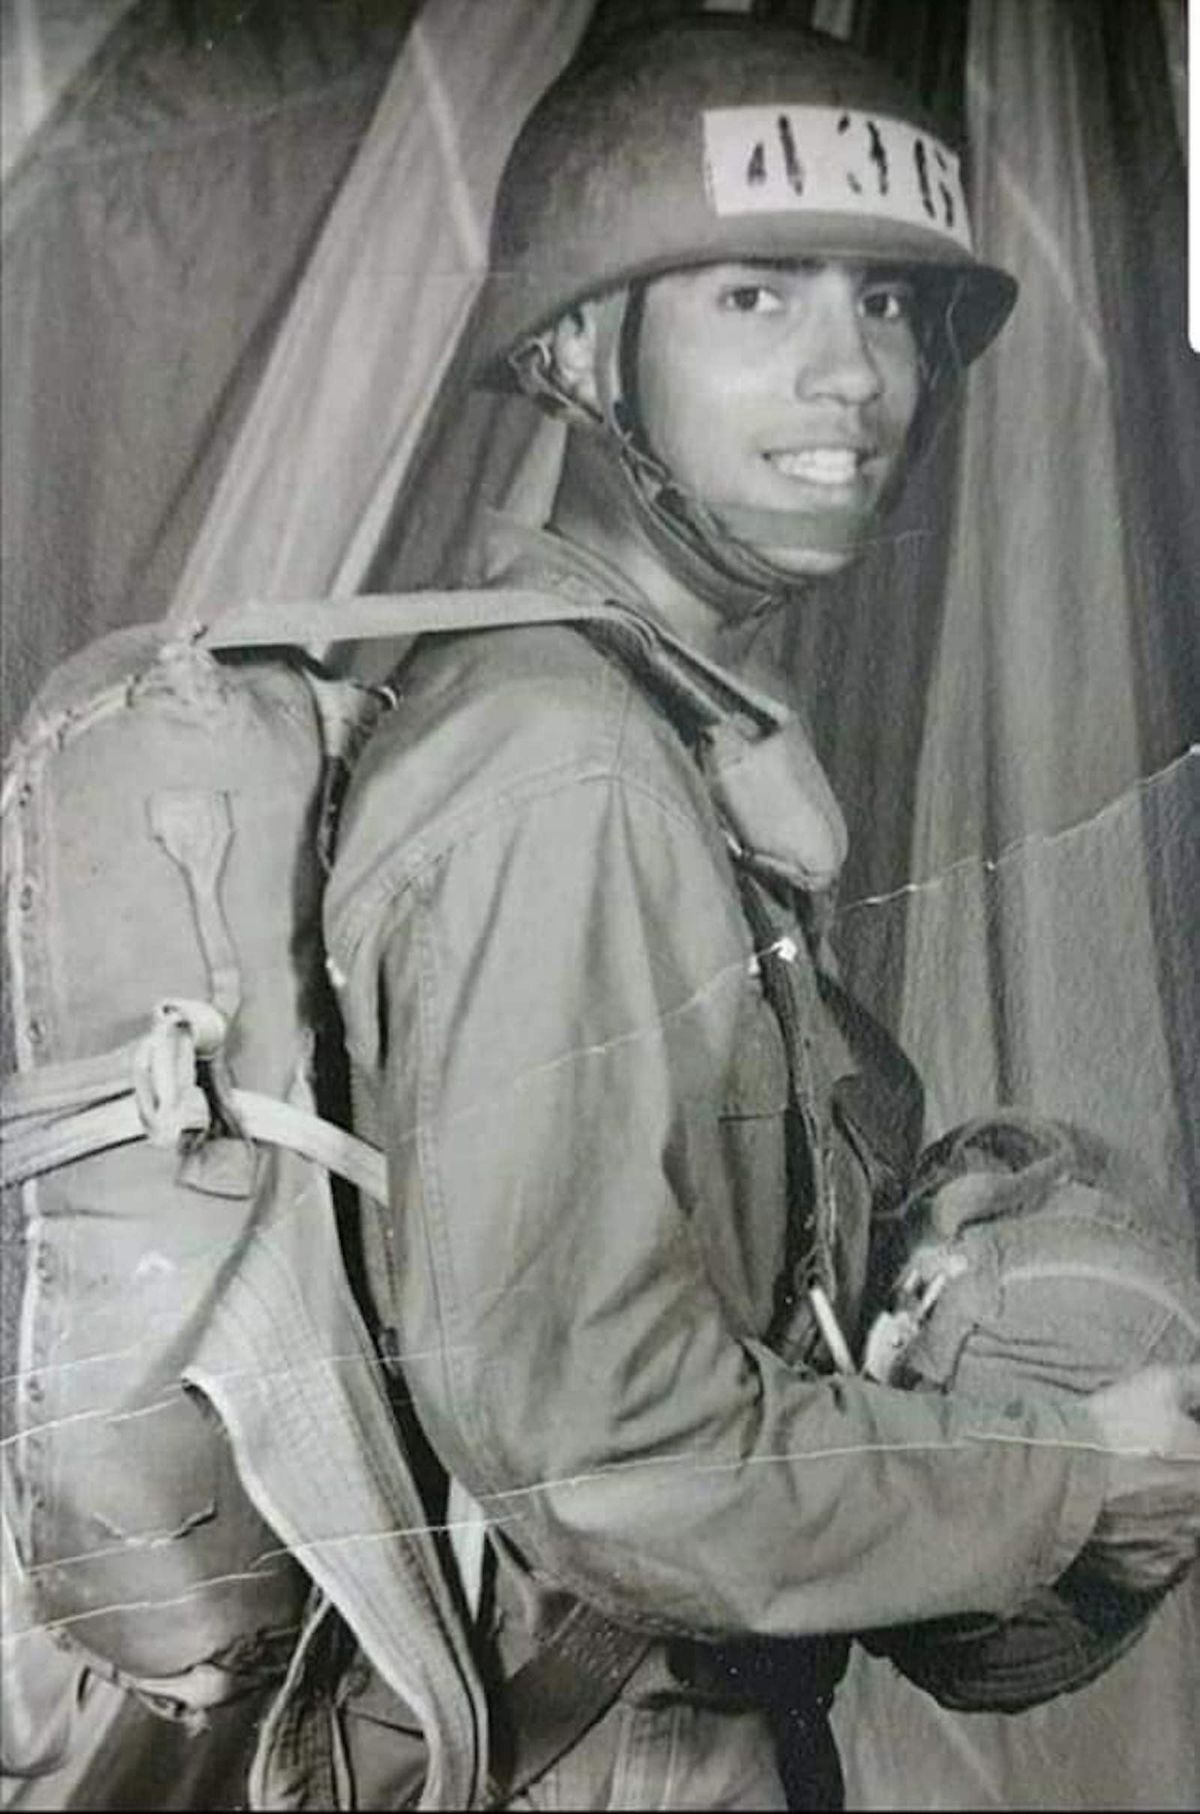 John Garrido Sr. was a member of the 101st Airborne Division.